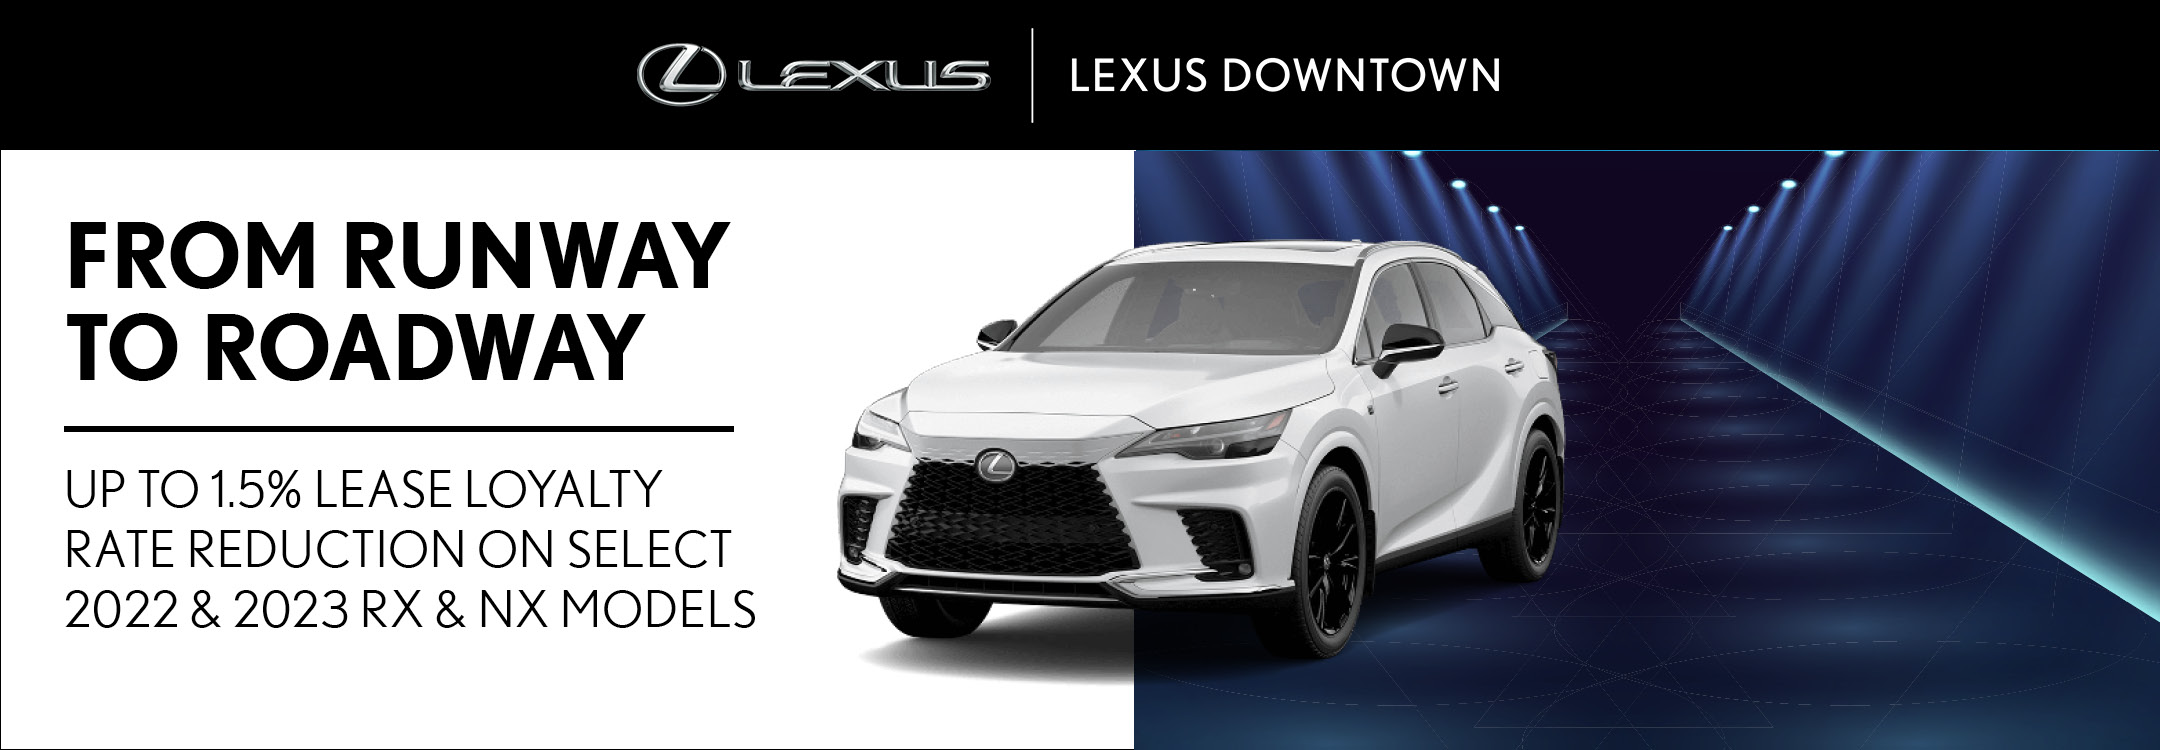 Special Offers at Lexus Downtown